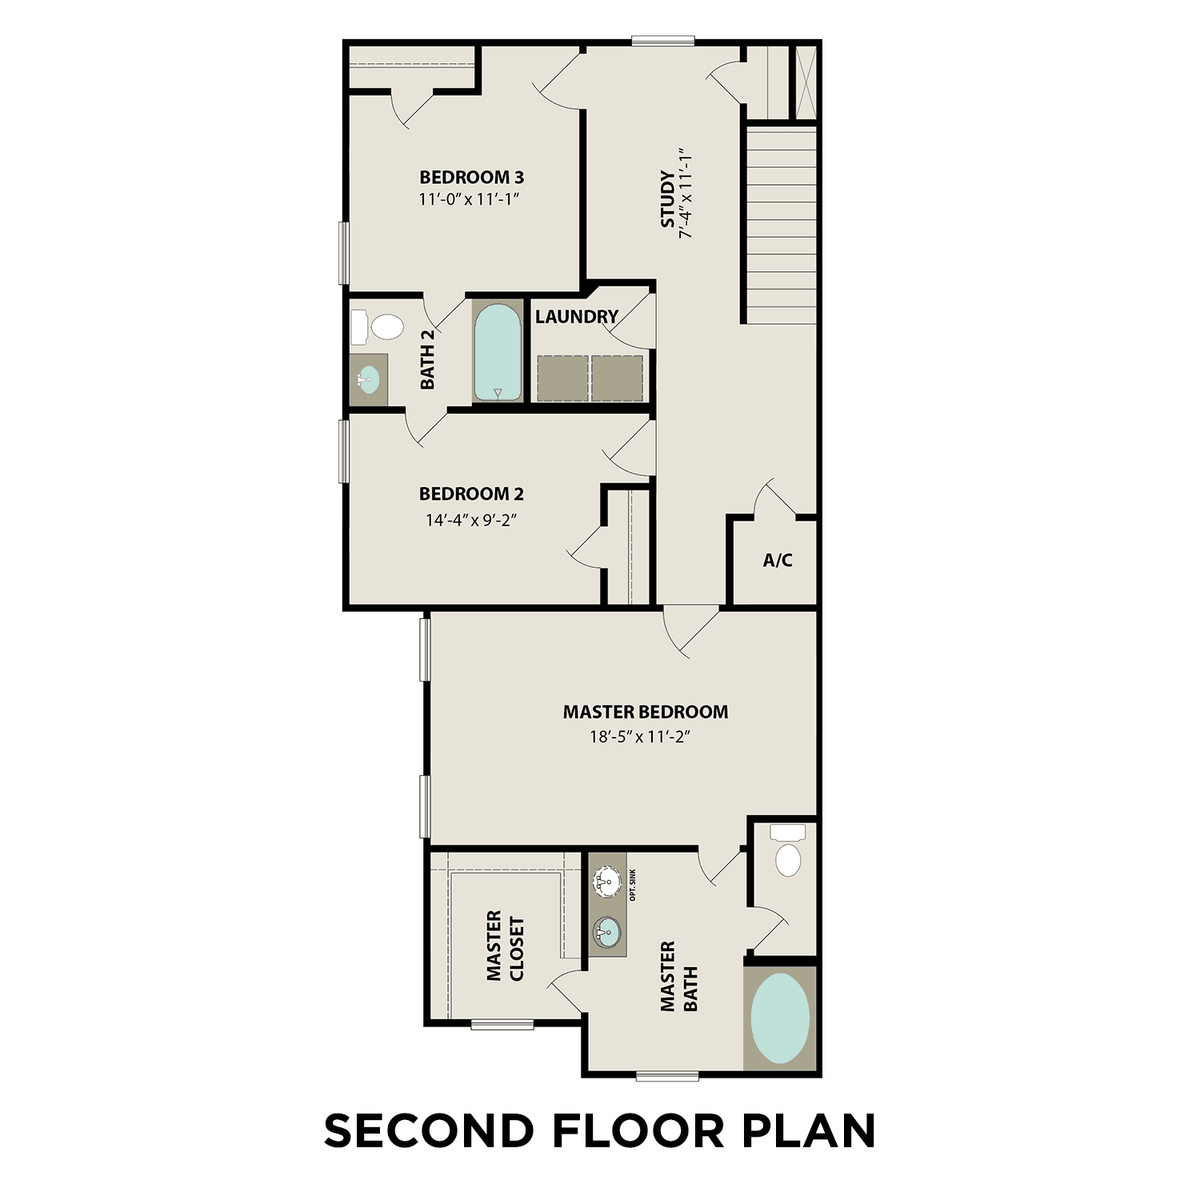 2 - The Lily A floor plan layout for 7027 Cedar Breeze Court in Davidson Homes' Enclave at Cypress community.